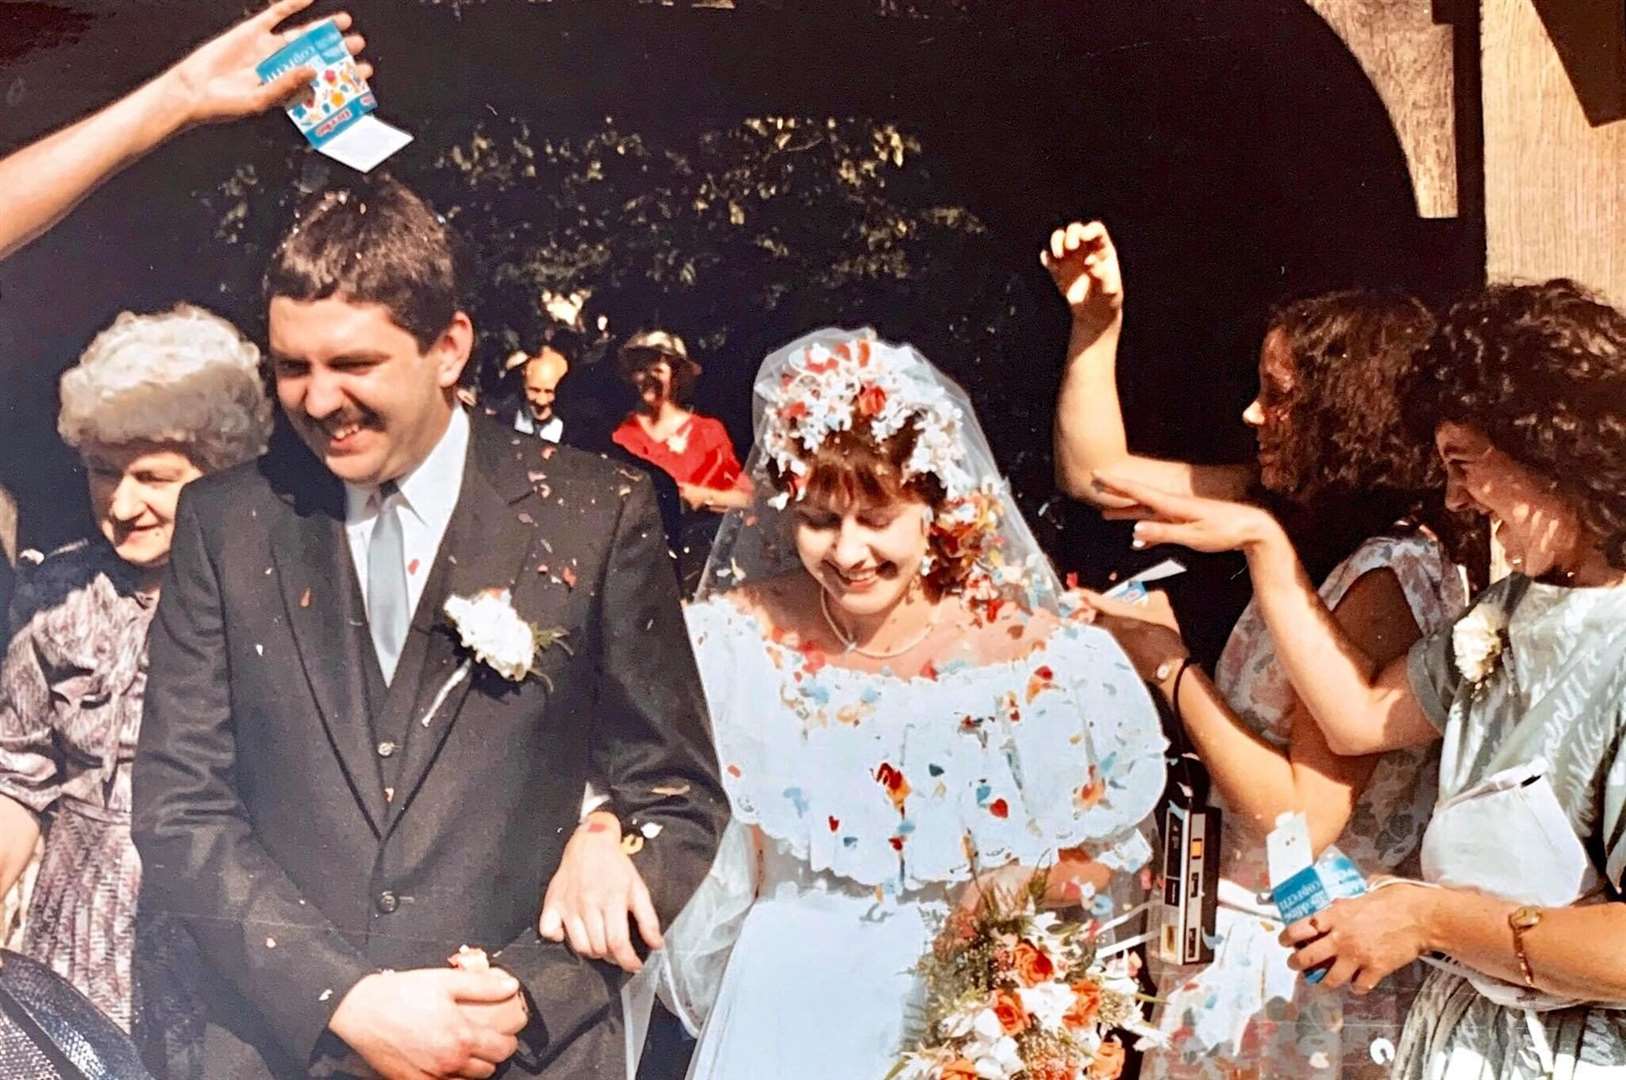 Paul and Joanne Seymour on their wedding day 35 years ago. Picture: South West News Service (16052502)